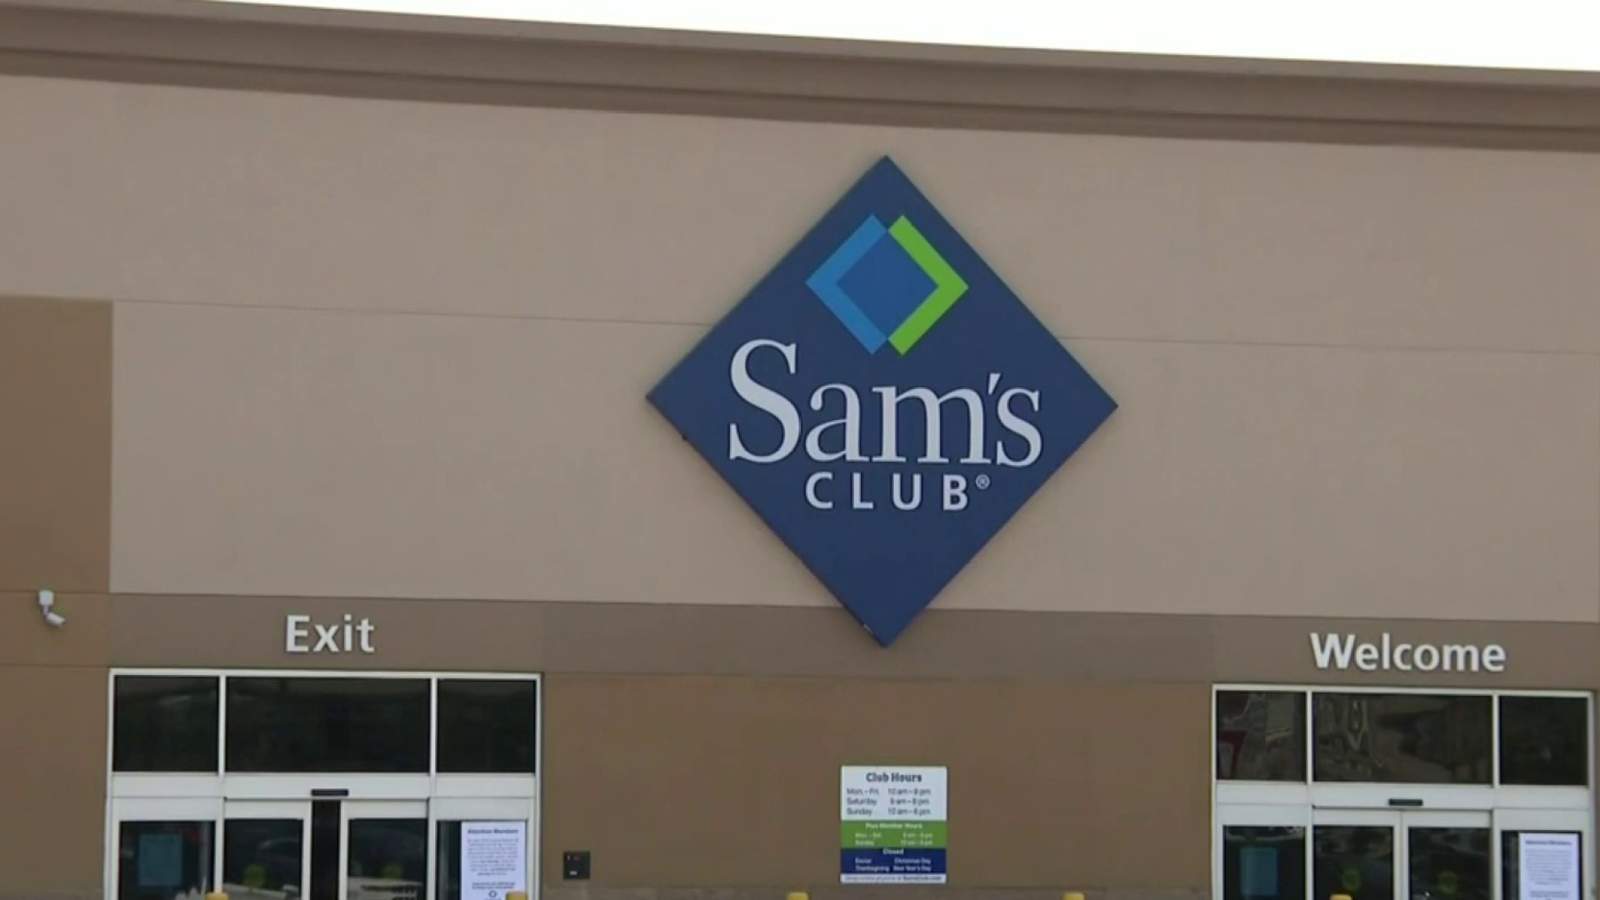 Walmart, Sam's Club to require masks in stores amid COVID-19 pandemic